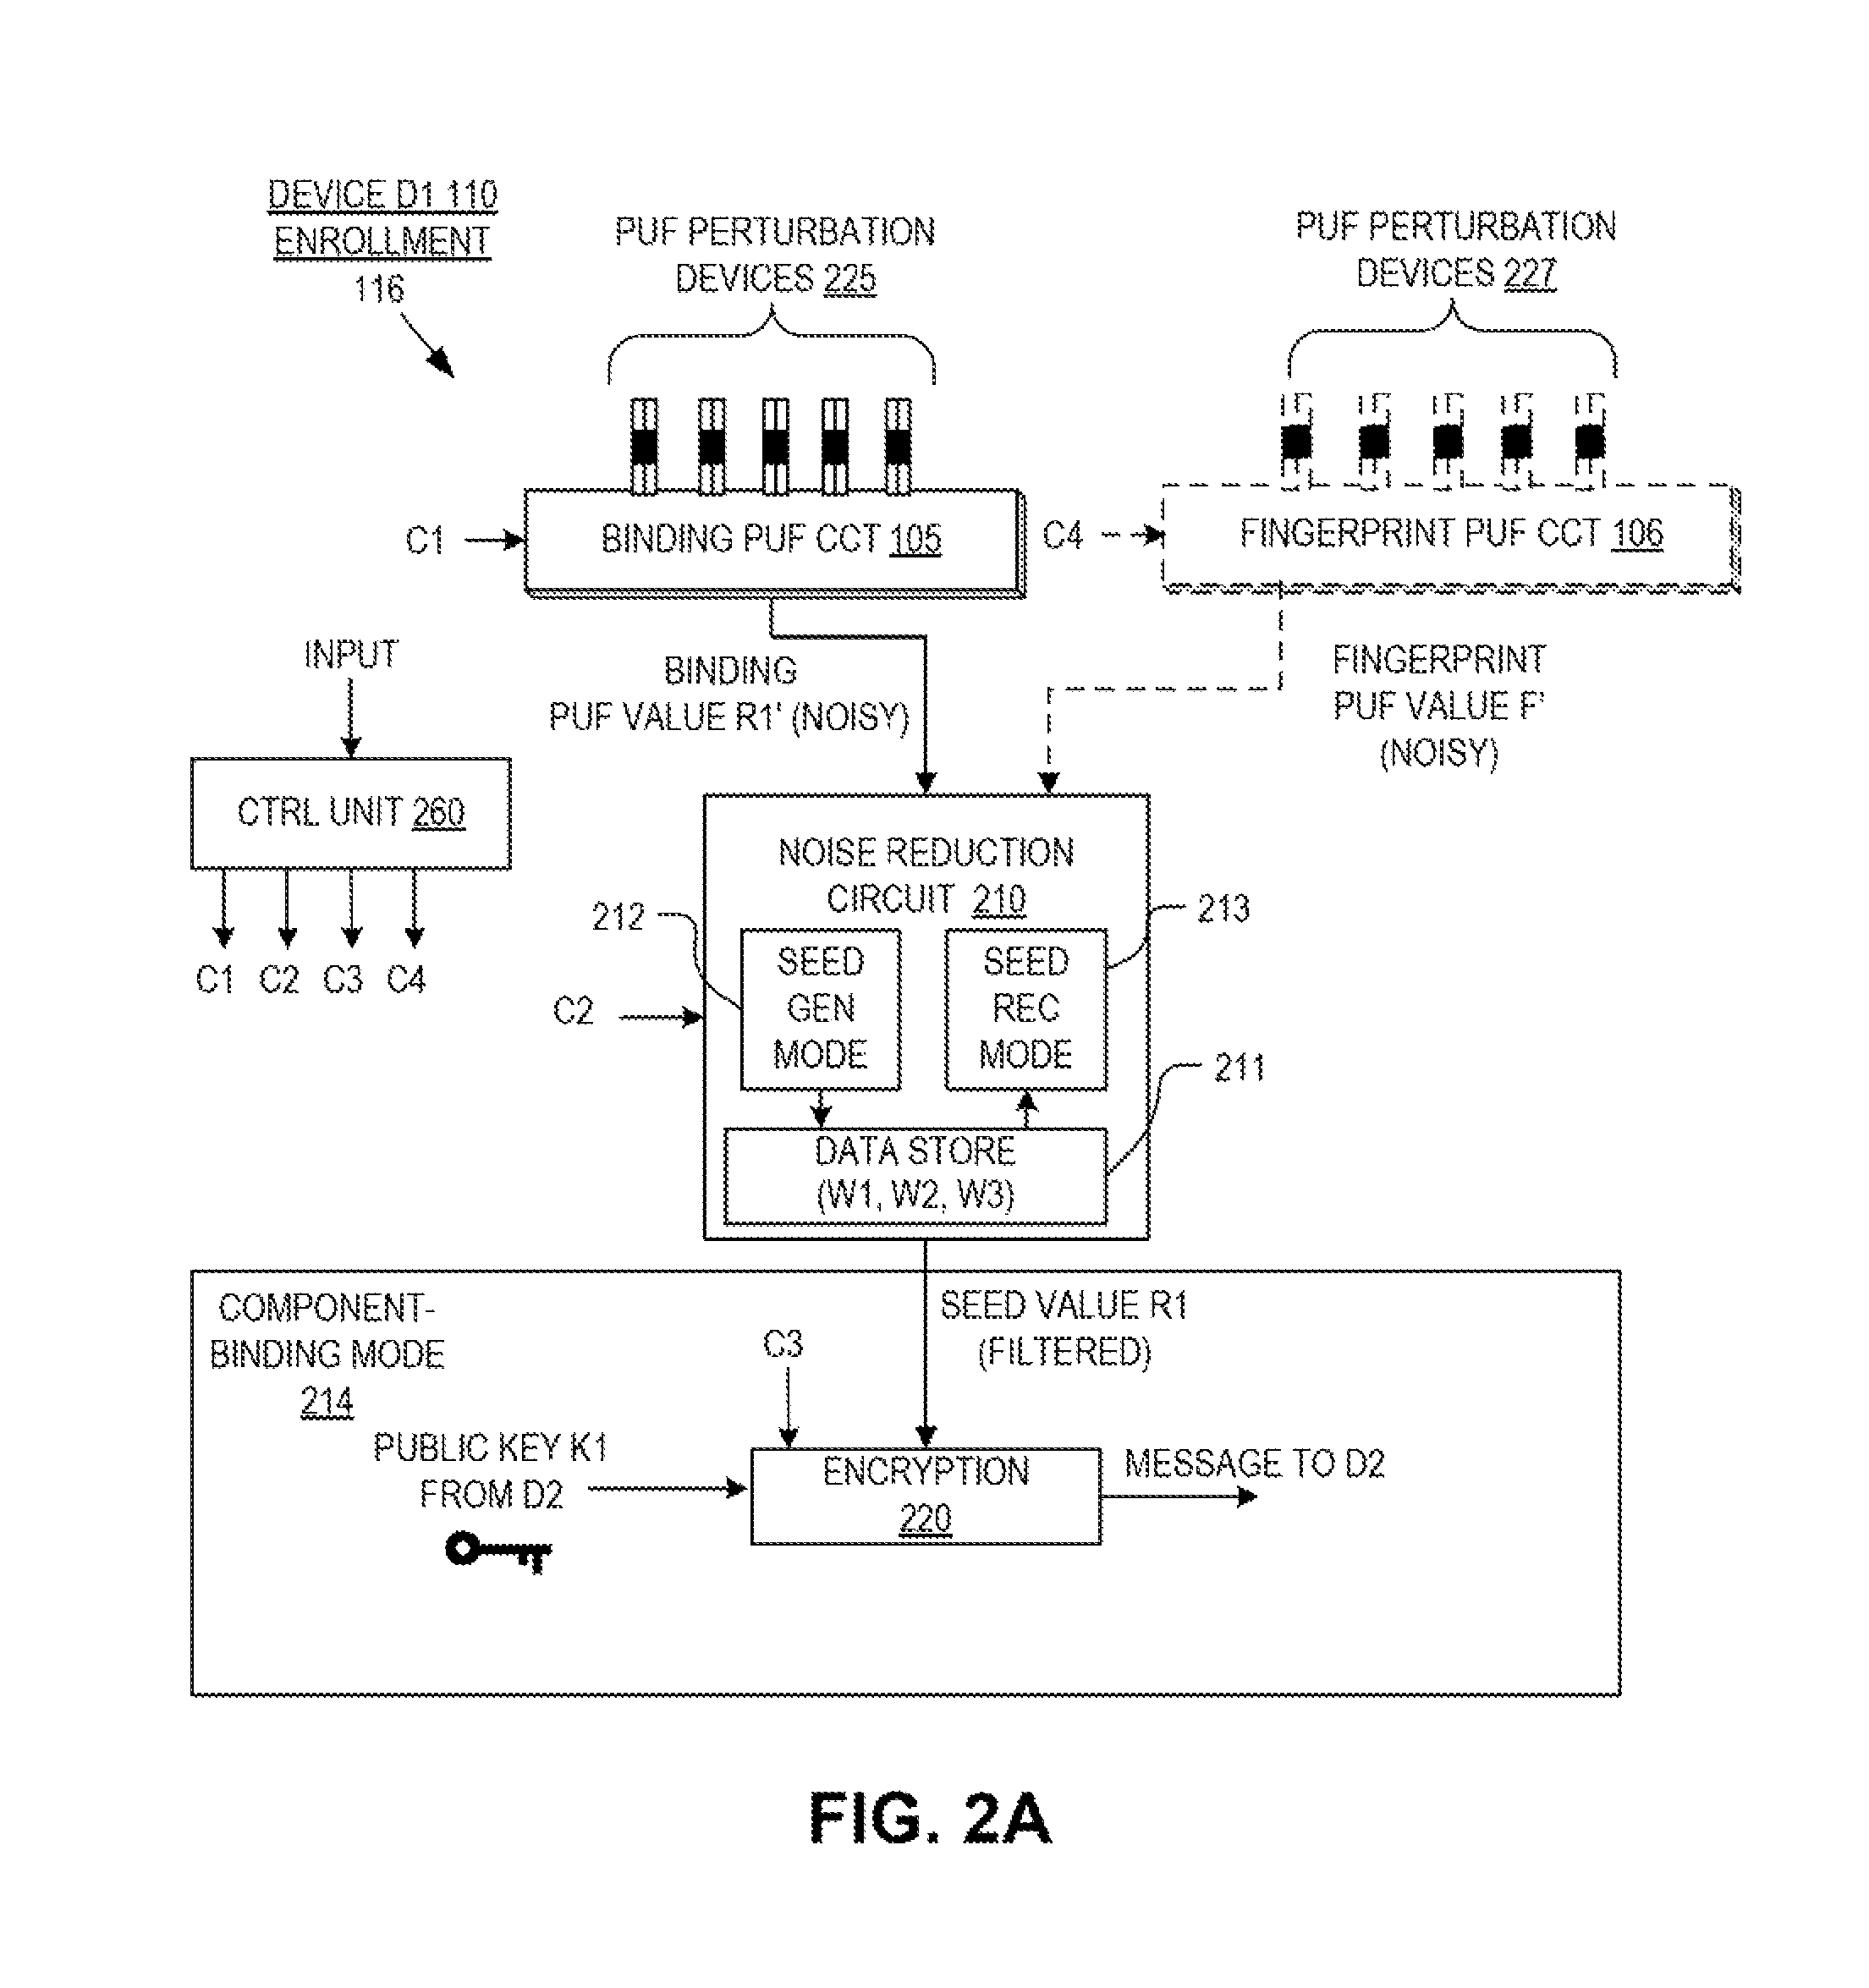 Hardware device binding and mutual authentication